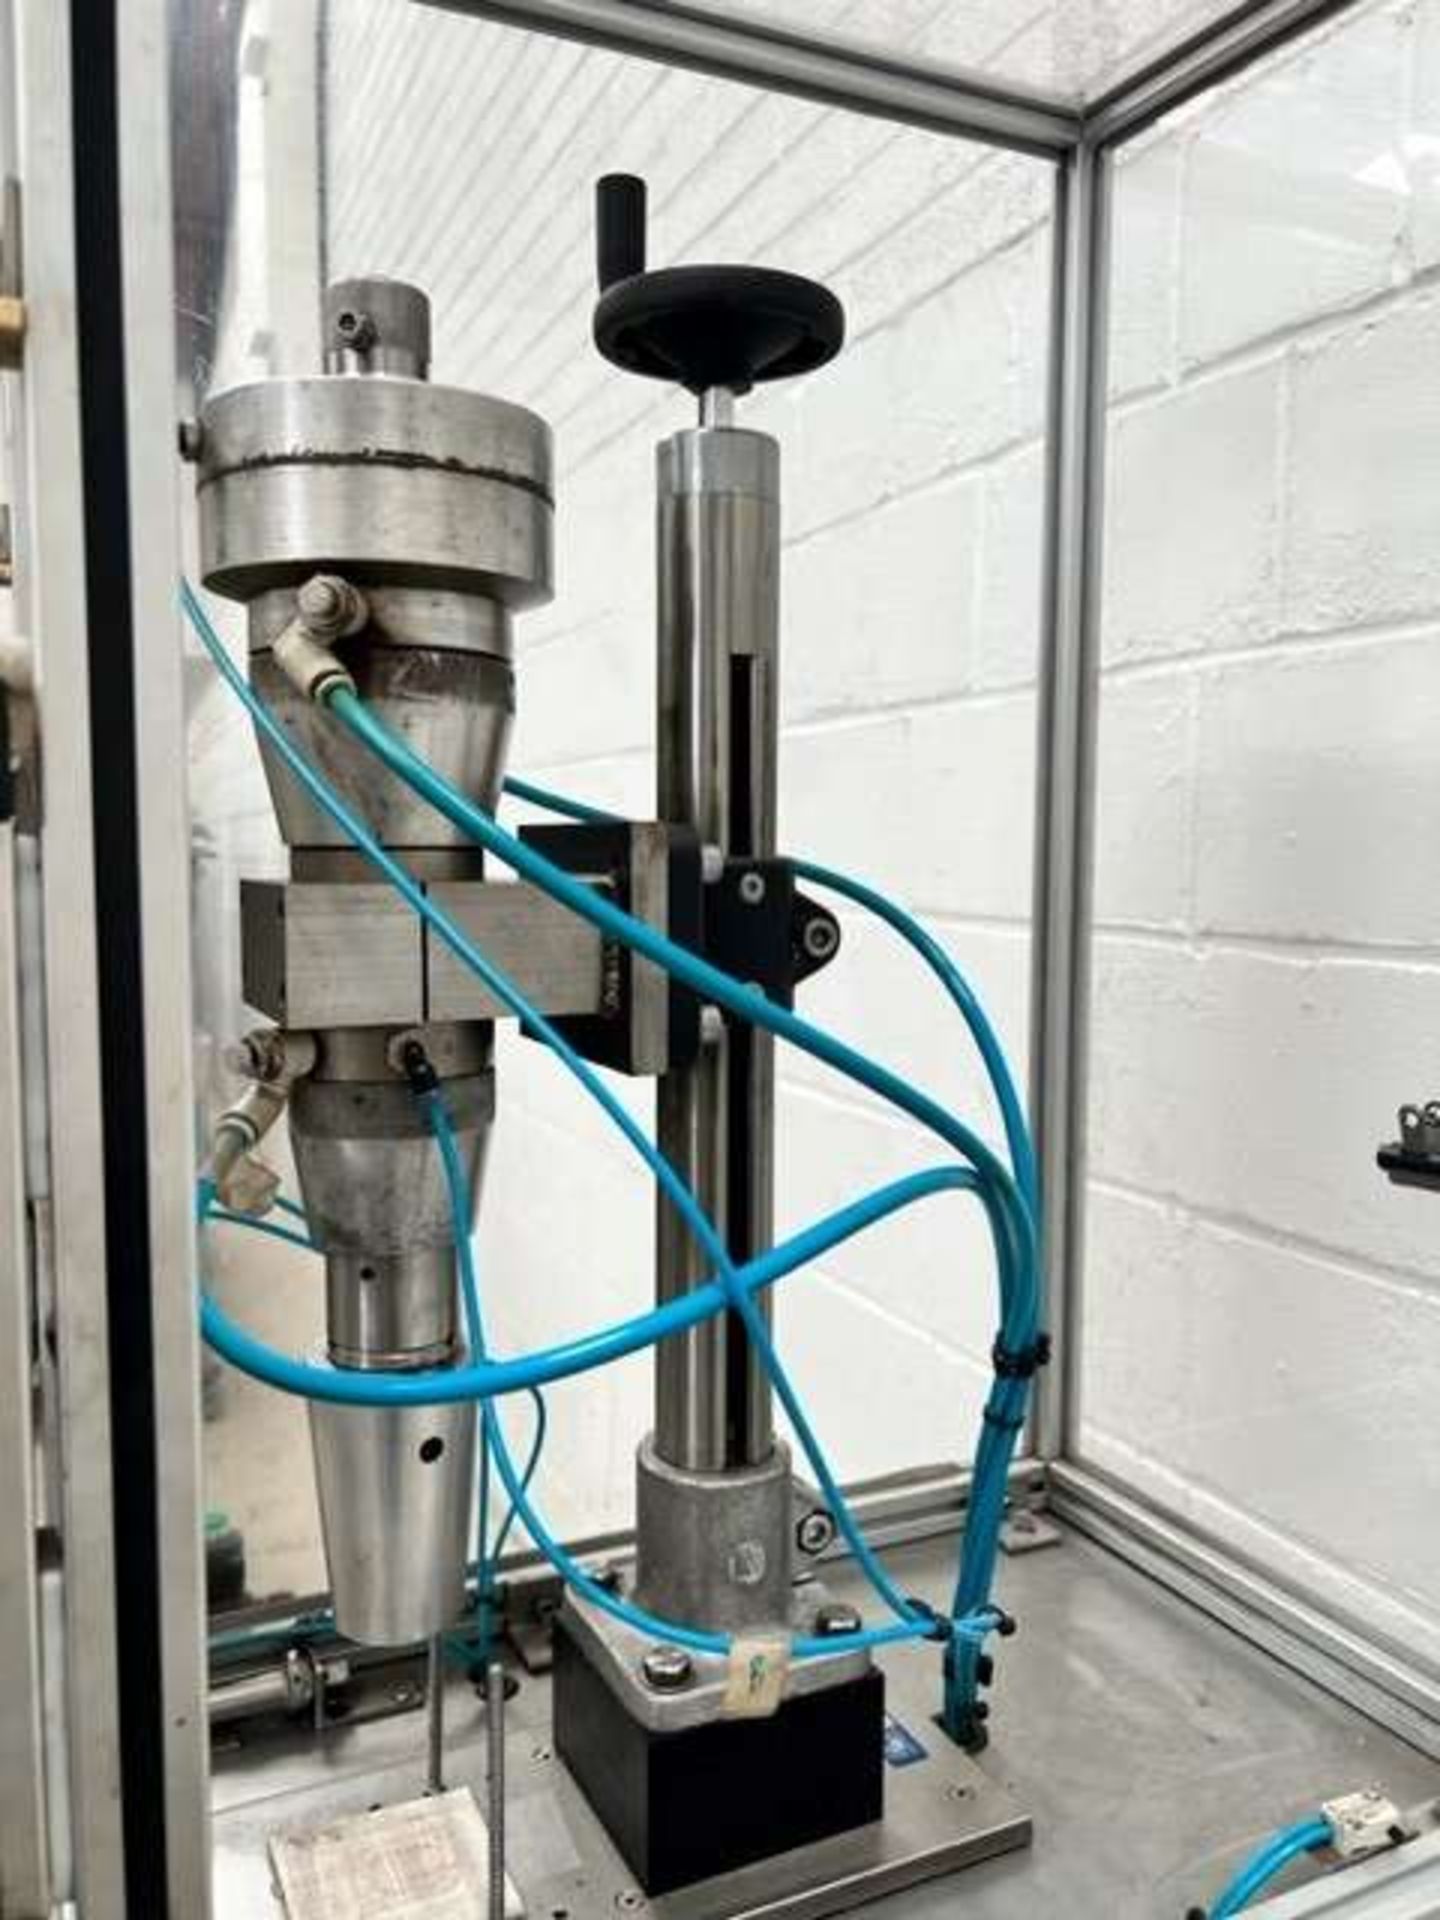 Semi Automatic Single Head Aerosol Capper with Stand and Guarding - Image 6 of 8